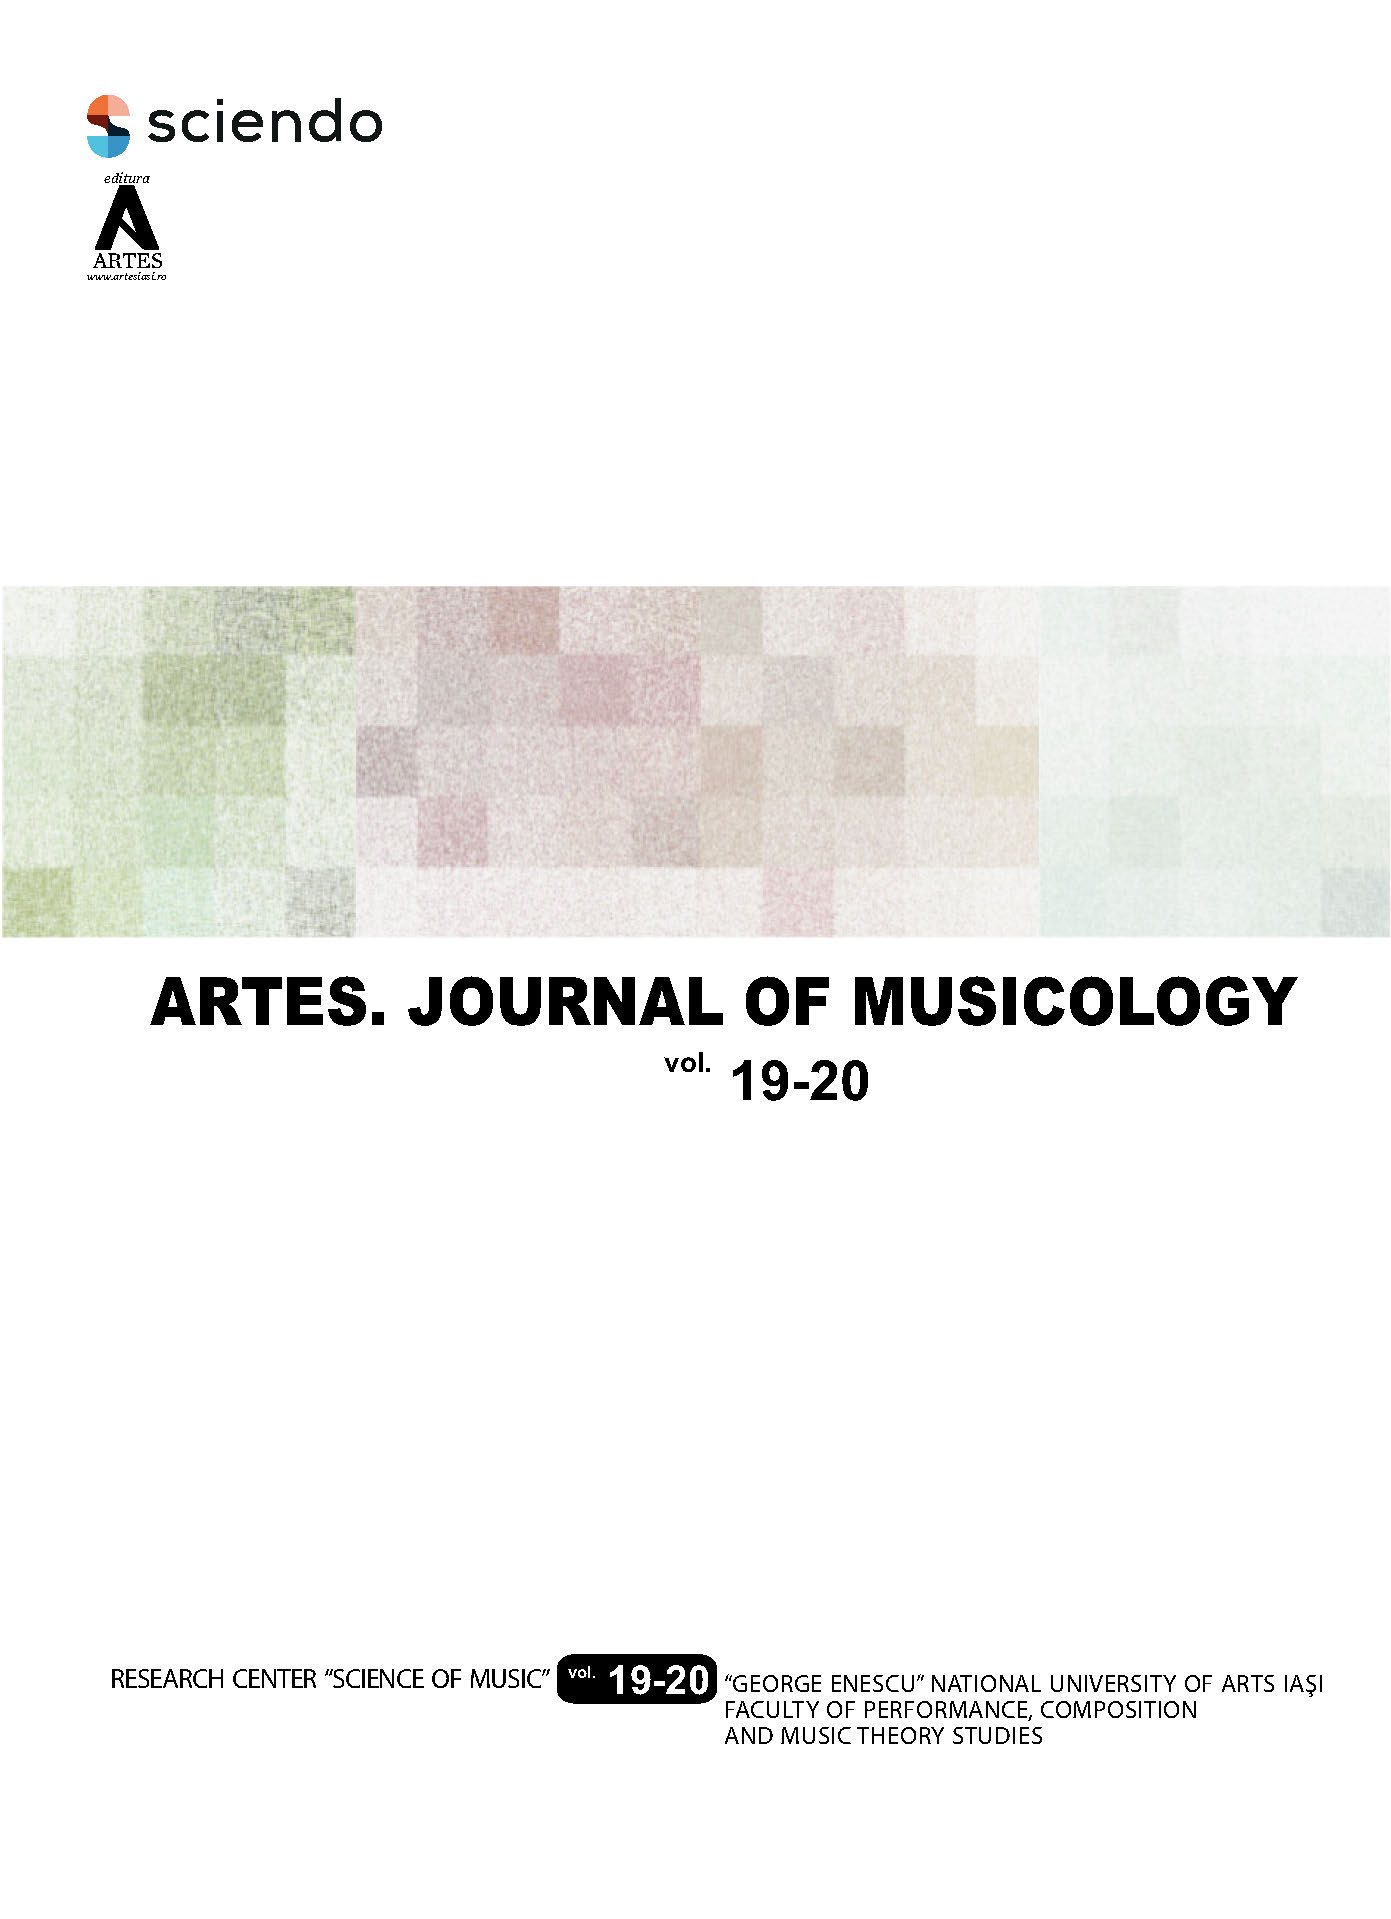 Jazz Influences in Chamber Musical Works created by Composers from Iaşi at the Beginning of the 21st Century Cover Image